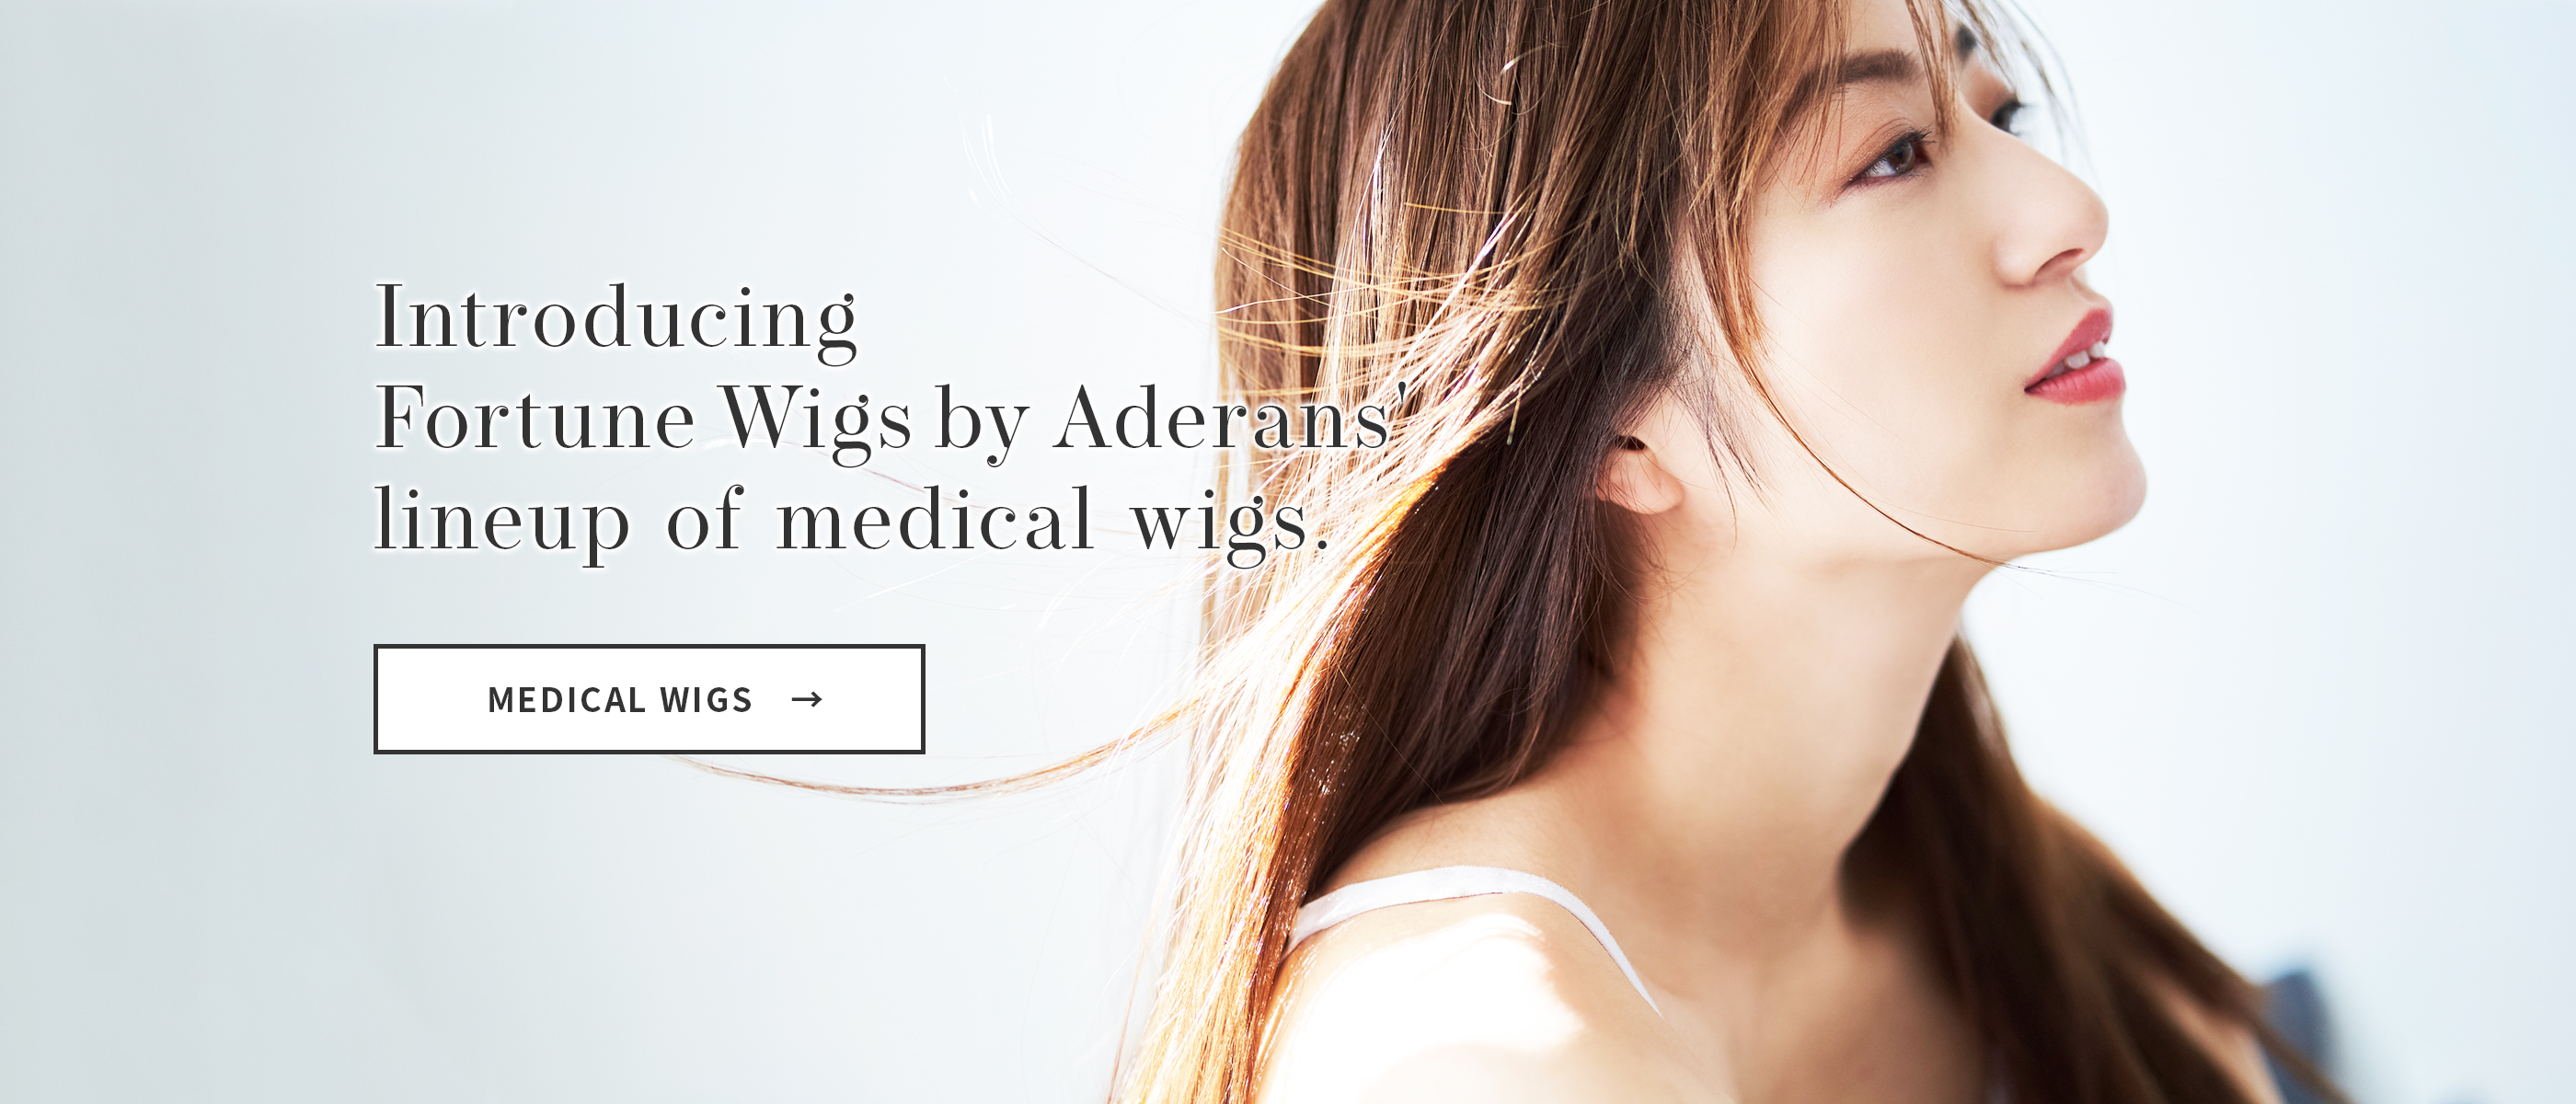 MEDICAL WIGS